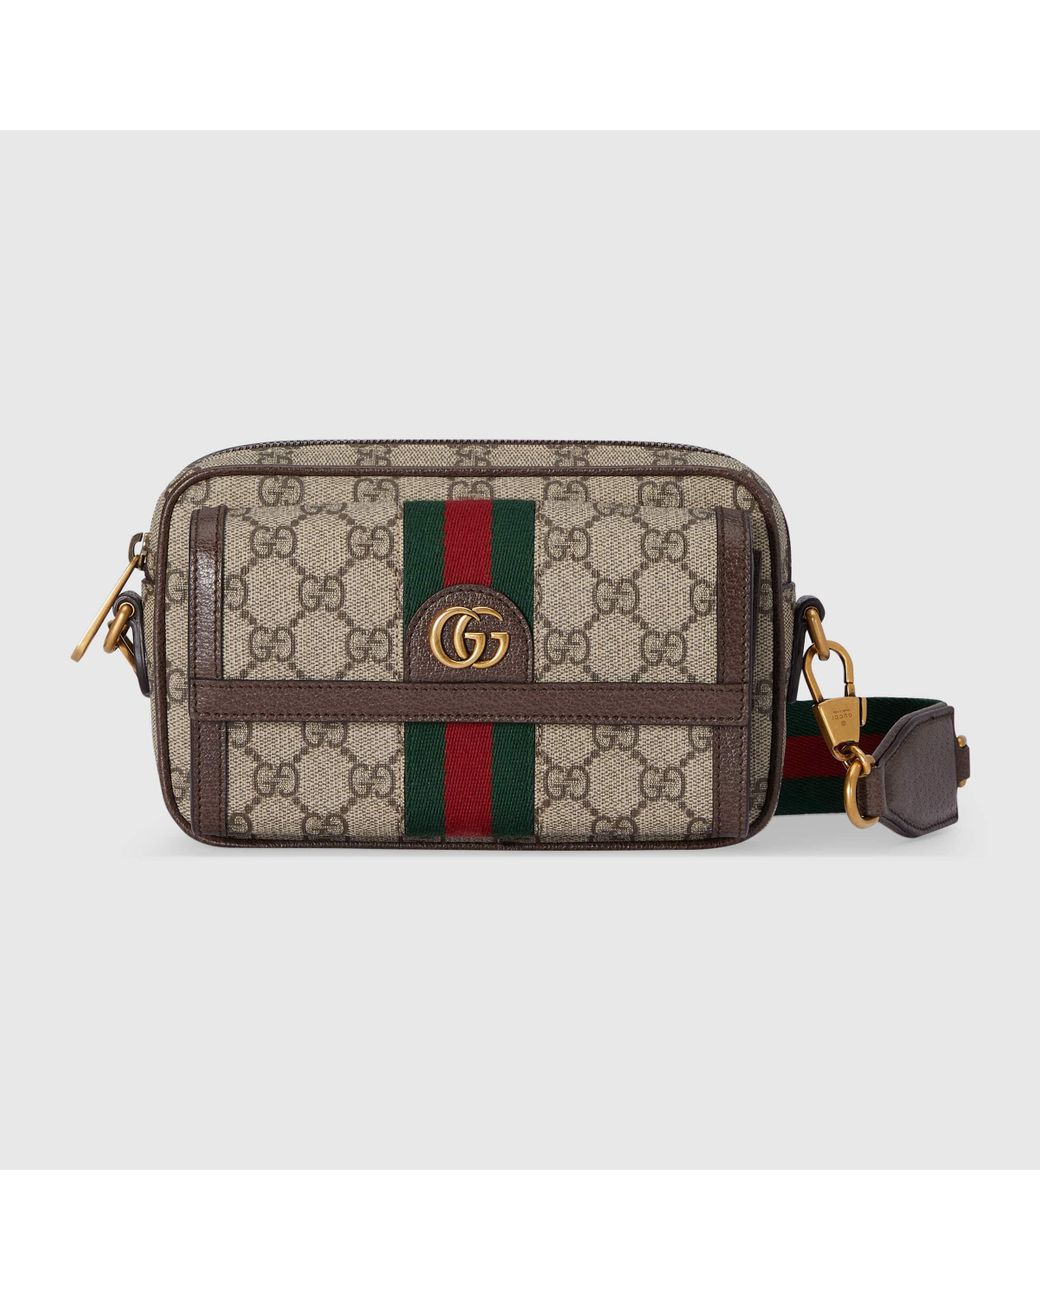 Gucci Ophidia GG Small shoulder bag - ShopStyle